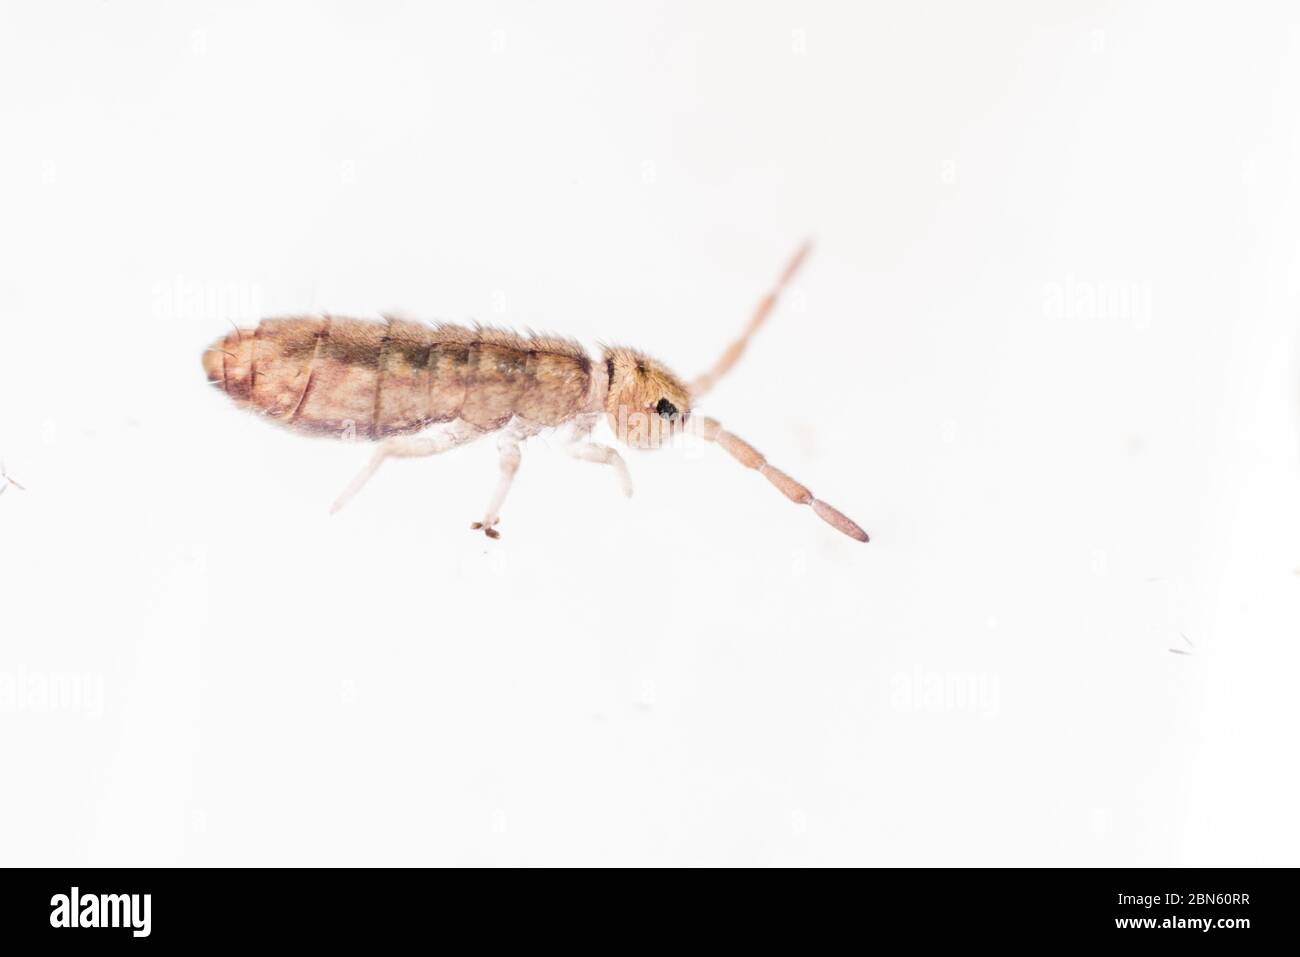 A tiny elongate bodied springtail from a garden in Berkeley, California. These little insects are ubiquitous but often overlooked. Stock Photo